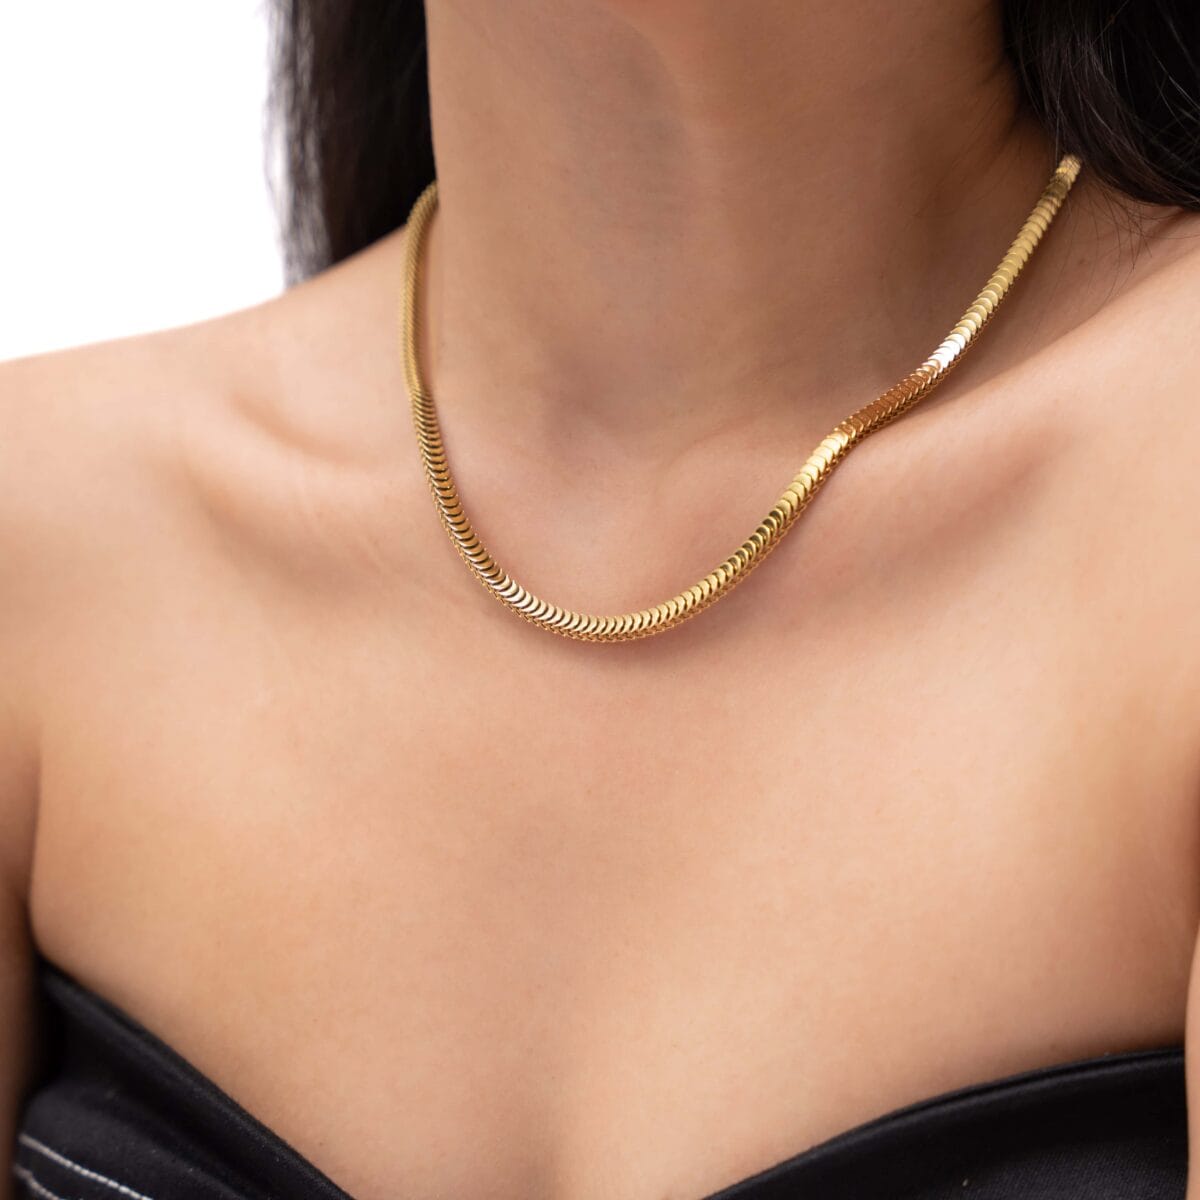 https://m.clubbella.co/product/gold-pleated-chain-statement-necklace/ DSC09344